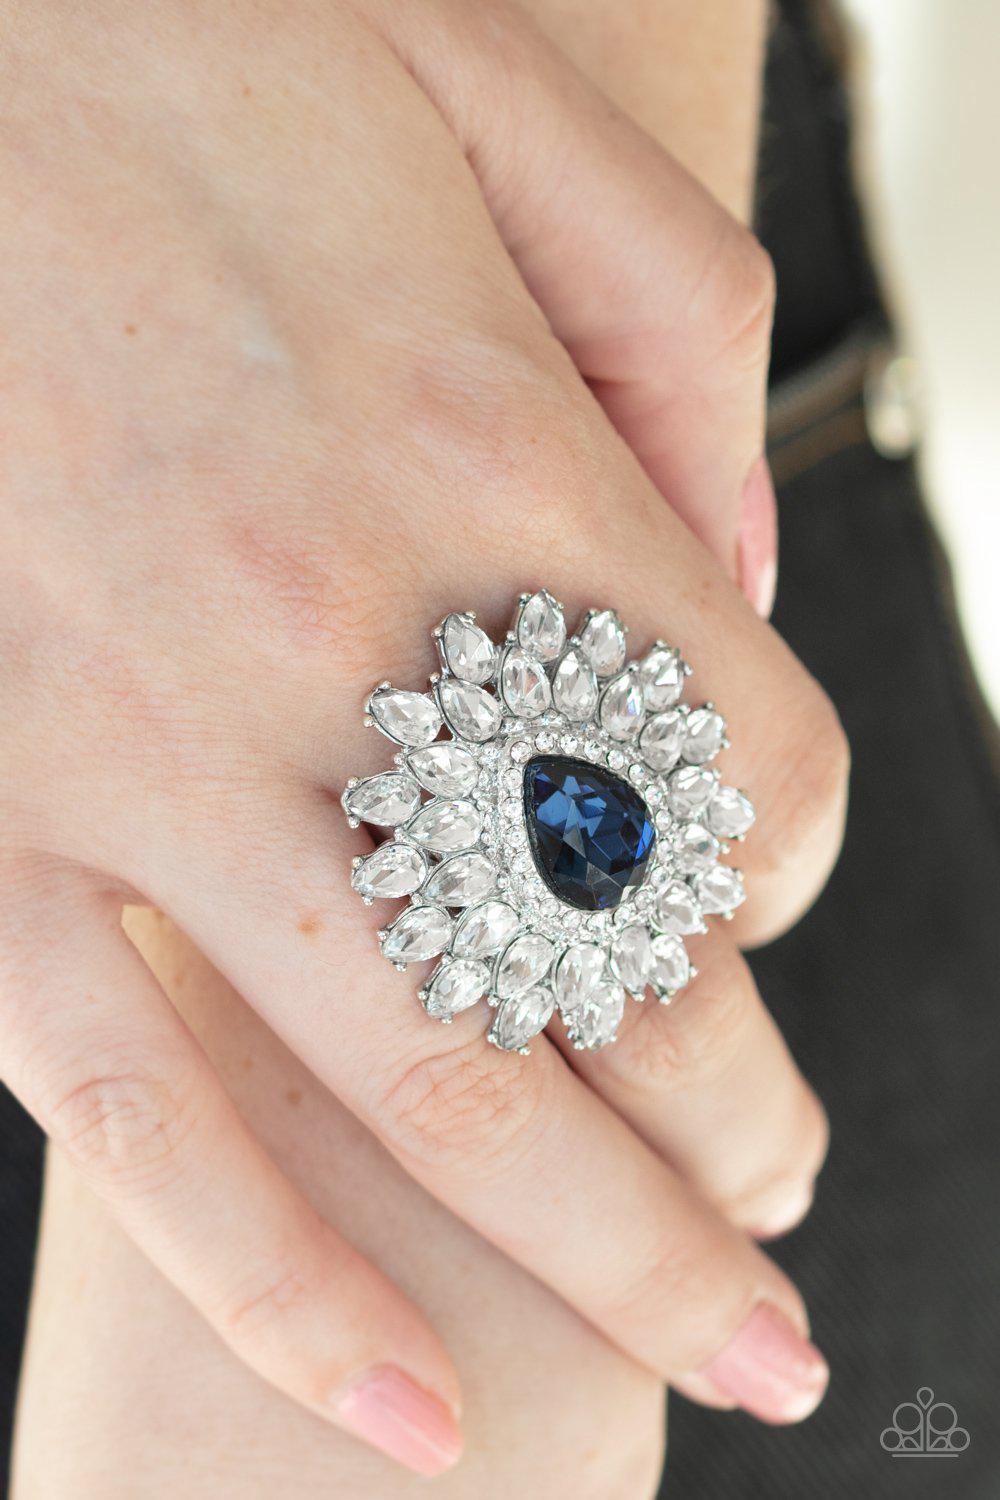 Who's Counting Blue and White Rhinestone Ring - Paparazzi Accessories-CarasShop.com - $5 Jewelry by Cara Jewels